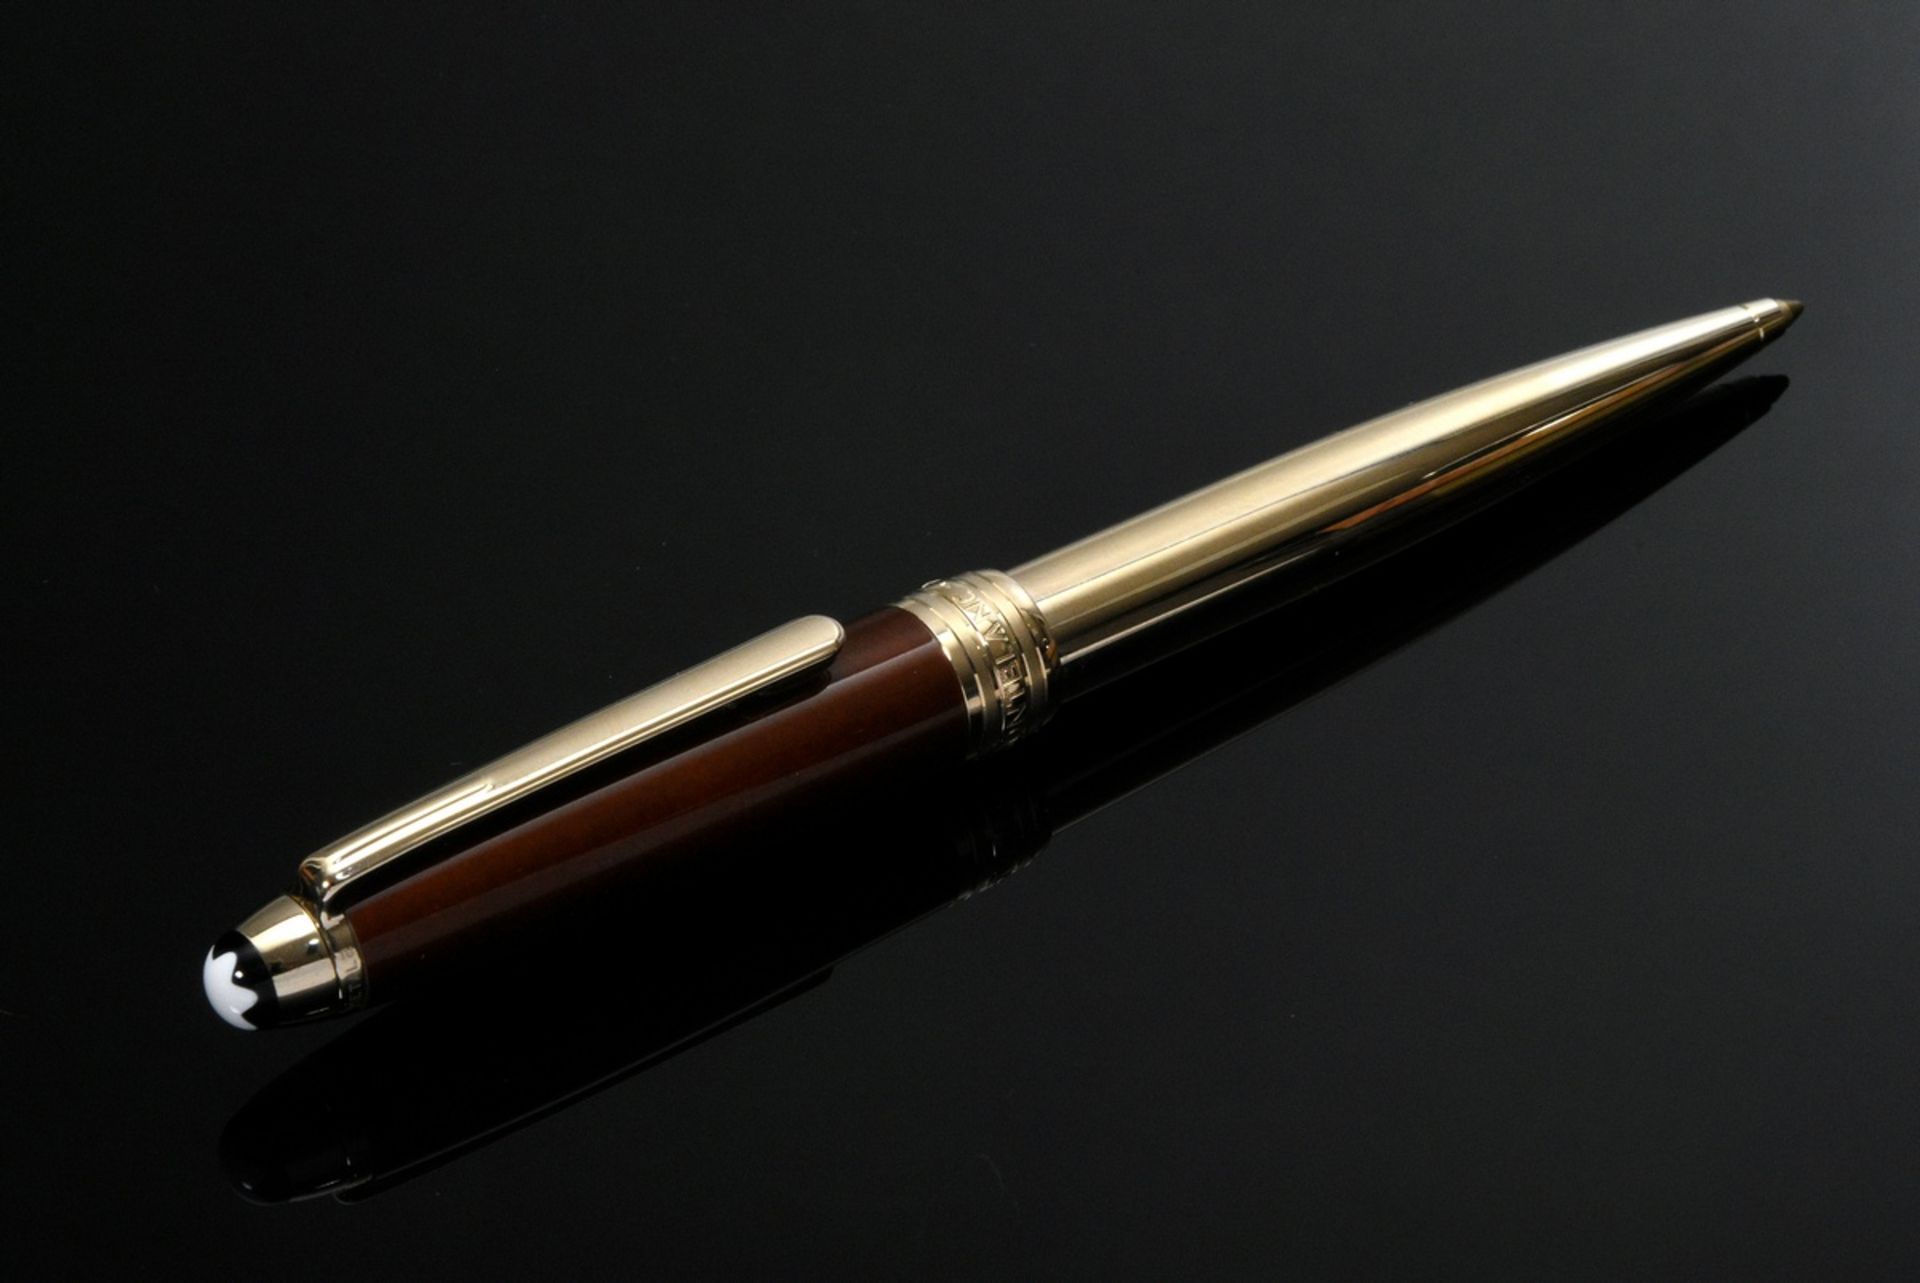 2 Pieces Montblanc fountain pen and biros: "Meisterstück Solitaire Citrine", stainless steel gold p - Image 5 of 7